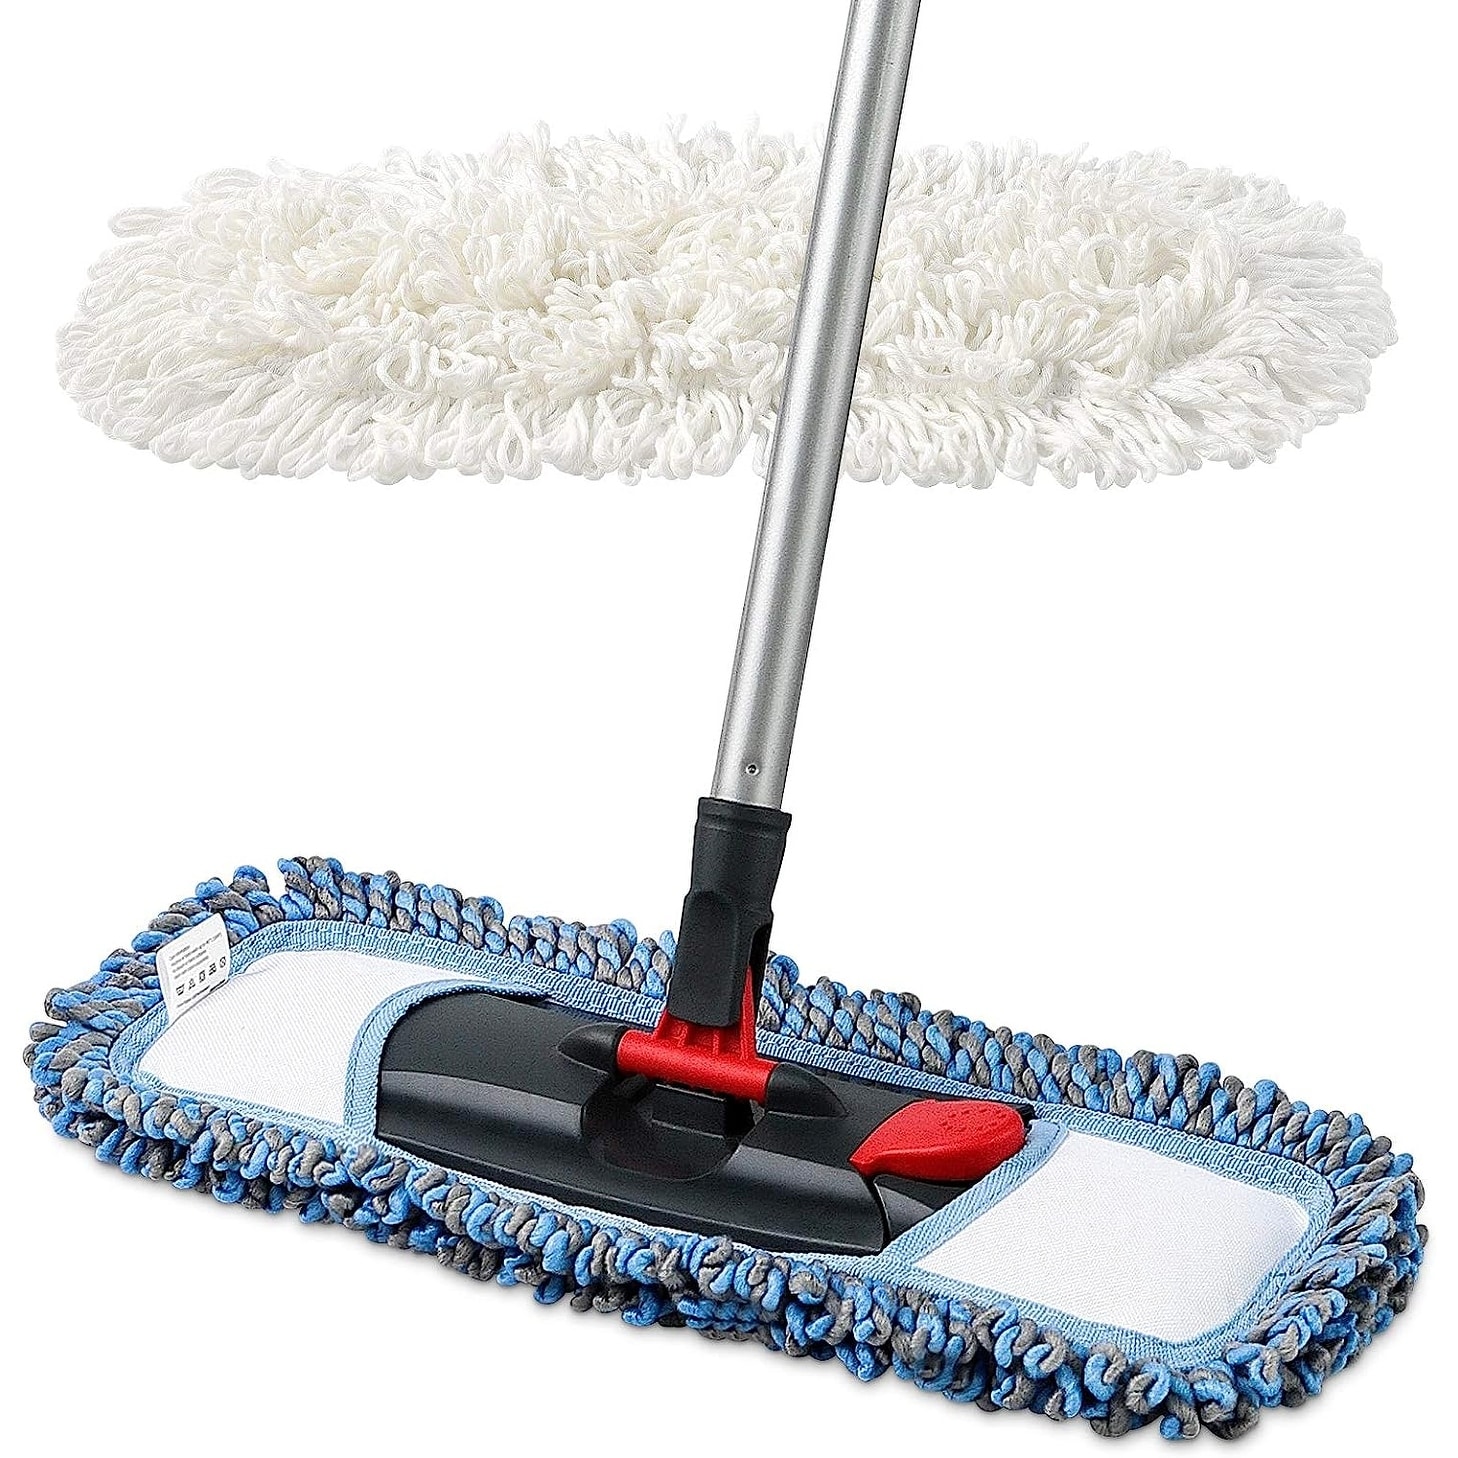 https://ak1.ostkcdn.com/images/products/is/images/direct/9da58a0c9a3b15b7de6030eb6749b3f9b8c0c94c/Dust-Mop-for-Floor-Cleaning-Microfiber-Professional-Dry-%26-Wet-Flat-Mops.jpg